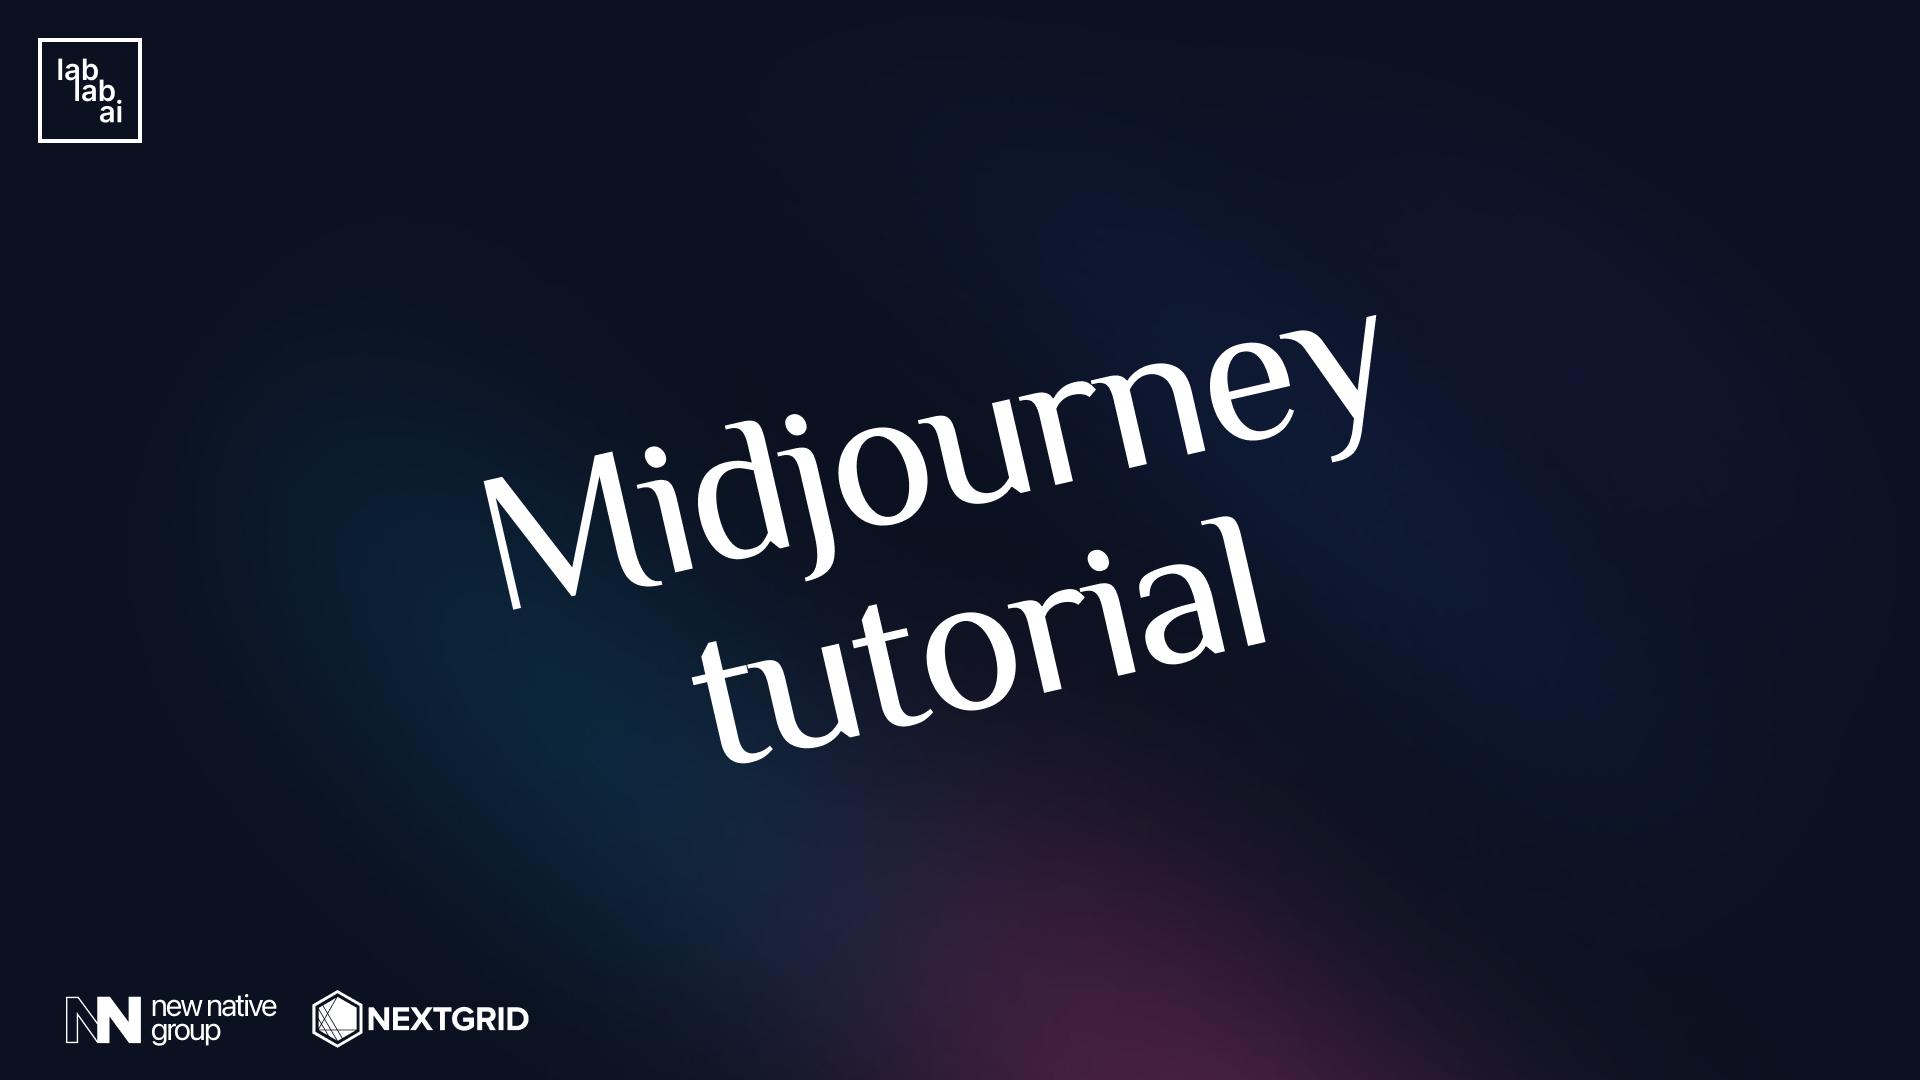 Midjourney AI art tutorial: Midjourney an interactive Bot to generate images from text.